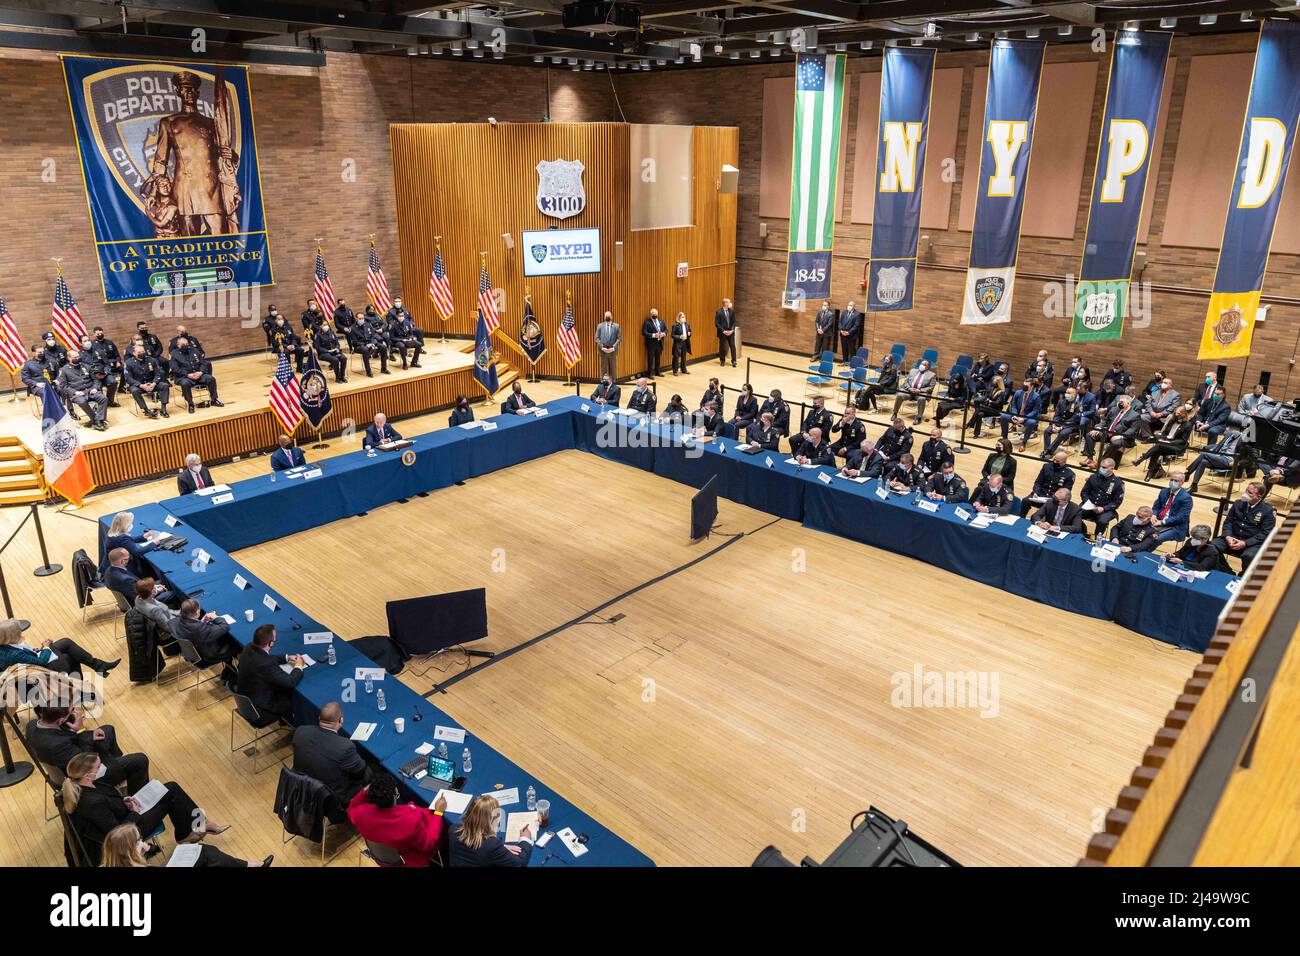 President Joe Biden participates in a Gun Violence Prevention Task Force meeting, Thursday, February 3, 2022, at NYPD Headquarters in New York. (Official White House Photo by Adam Schultz) Stock Photo